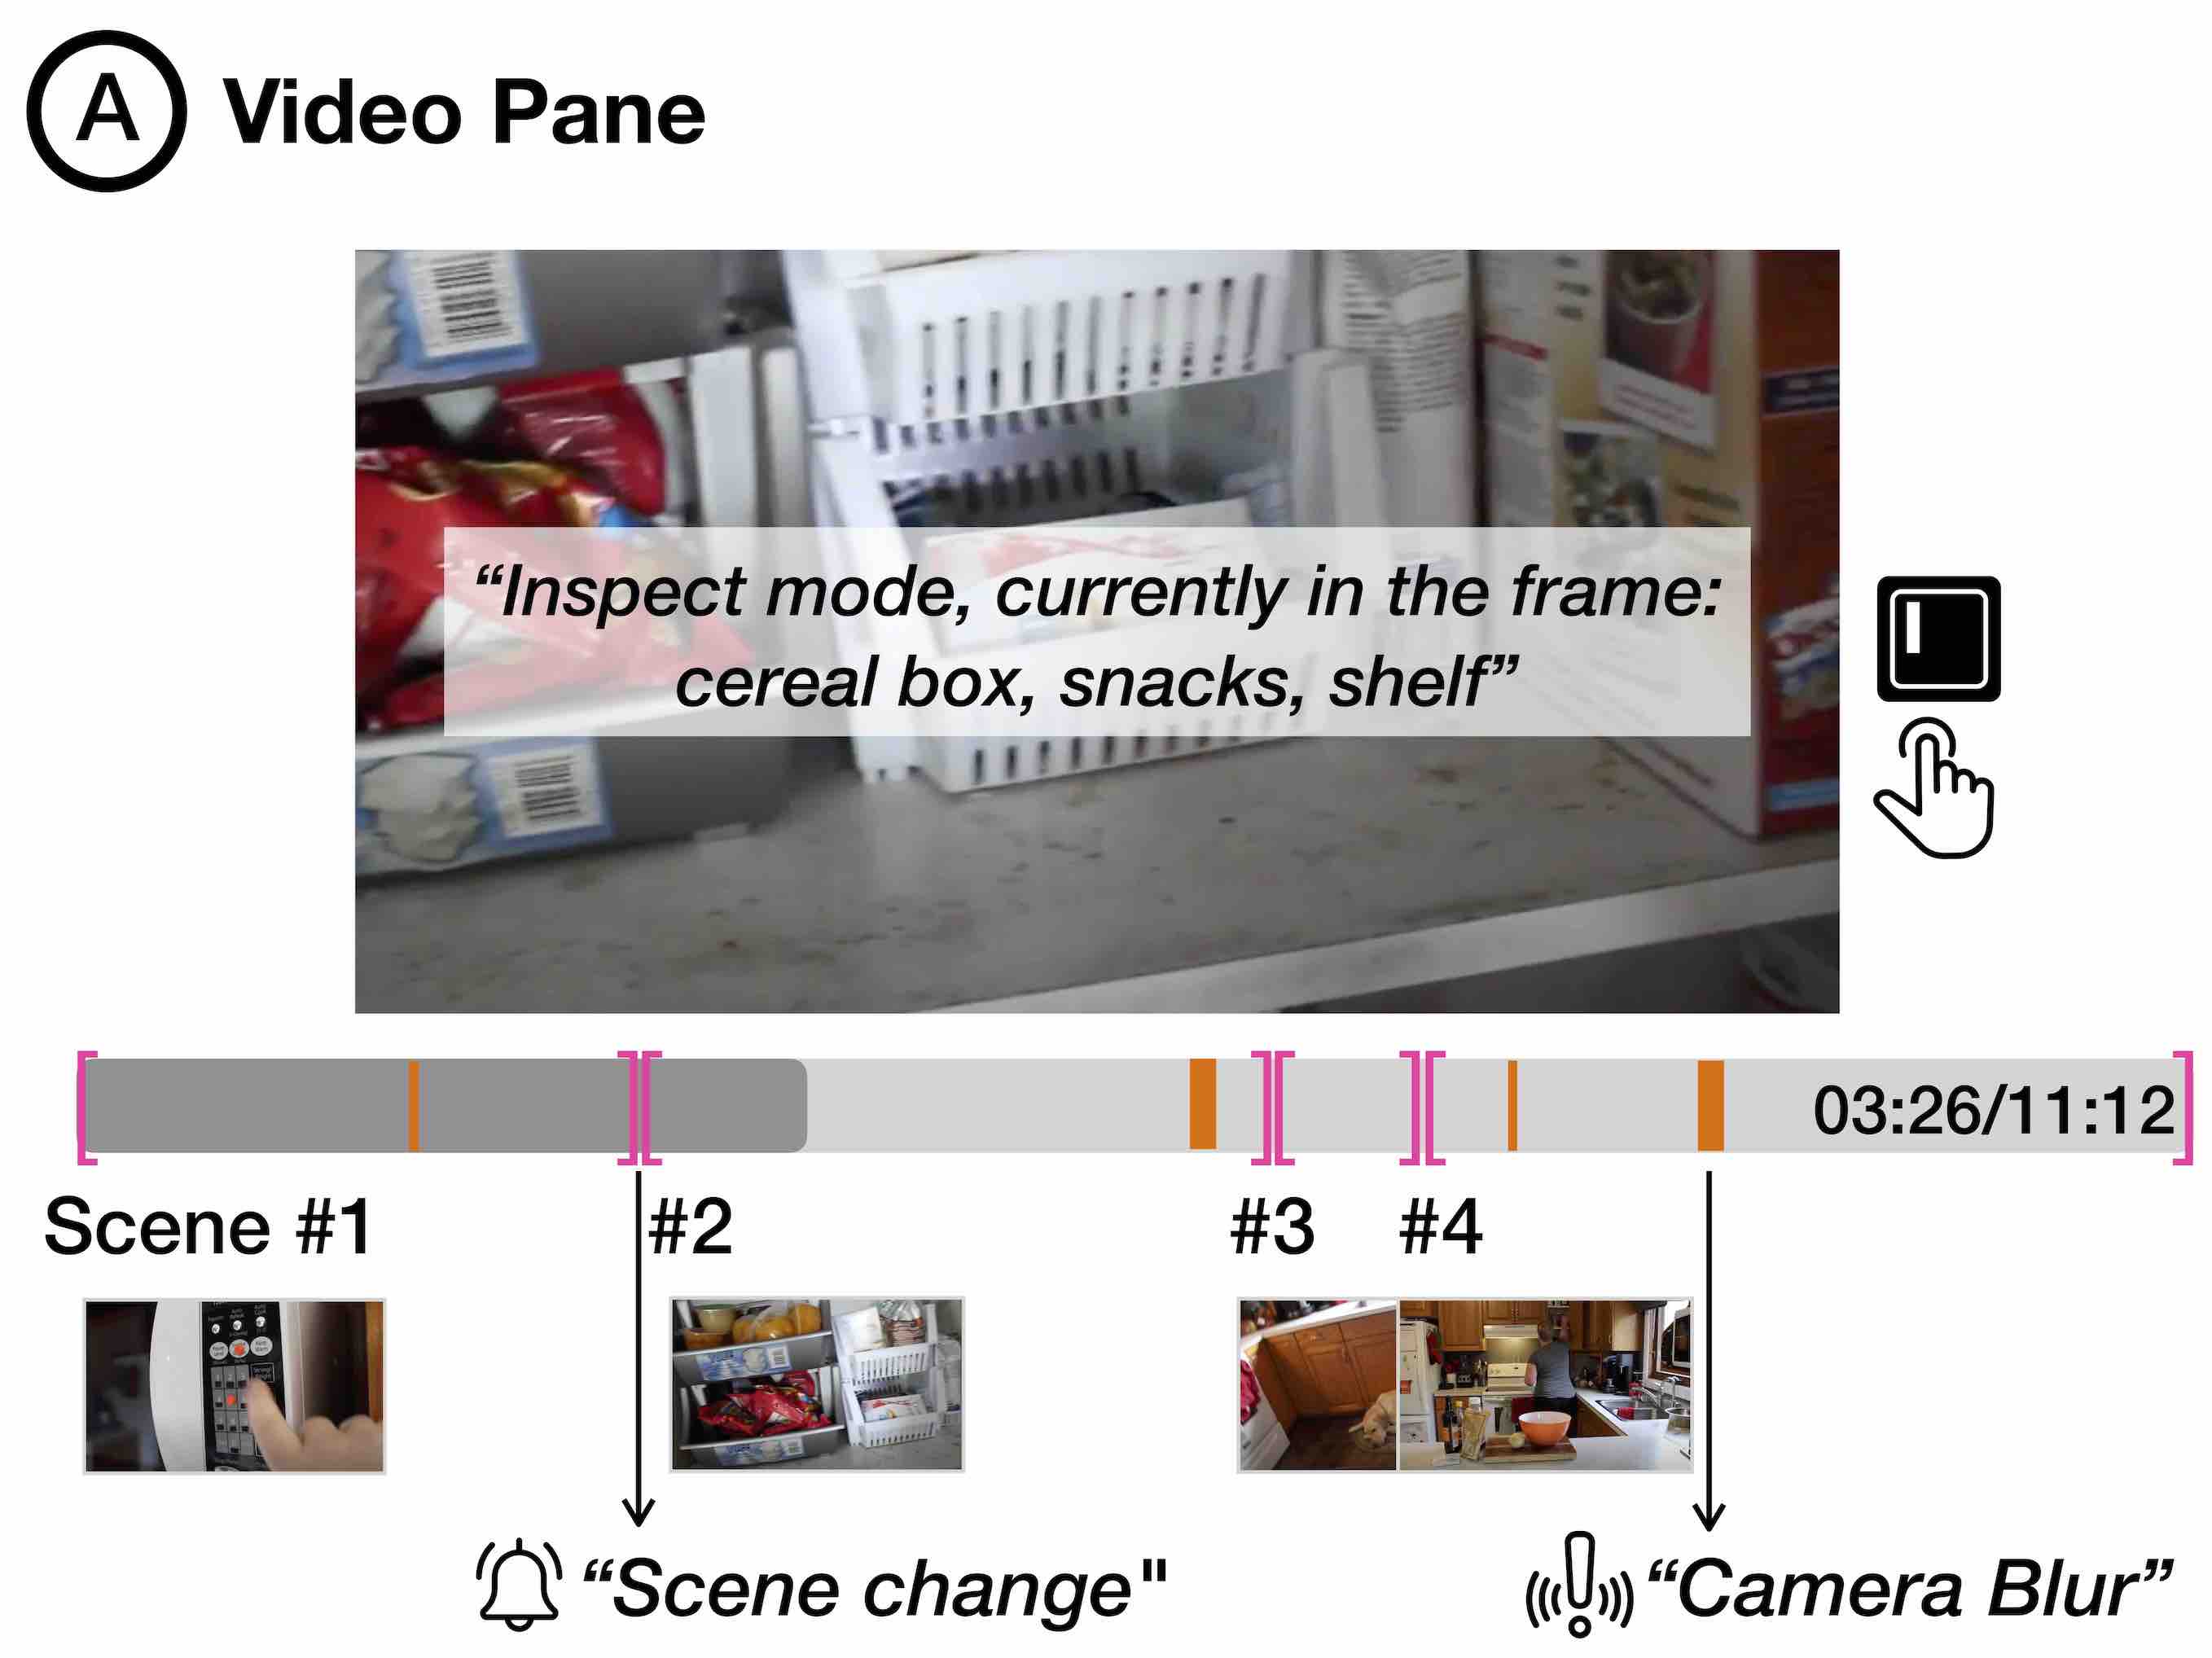 The close-up of the video pane. Over the video player timeline, notification icons are shown to indicate that this information is provided as users play the video. When the user clicks the `i' key, the following speech is provided: ``Inspect mode, currently in the frame: cereal box, snacks, shelf''